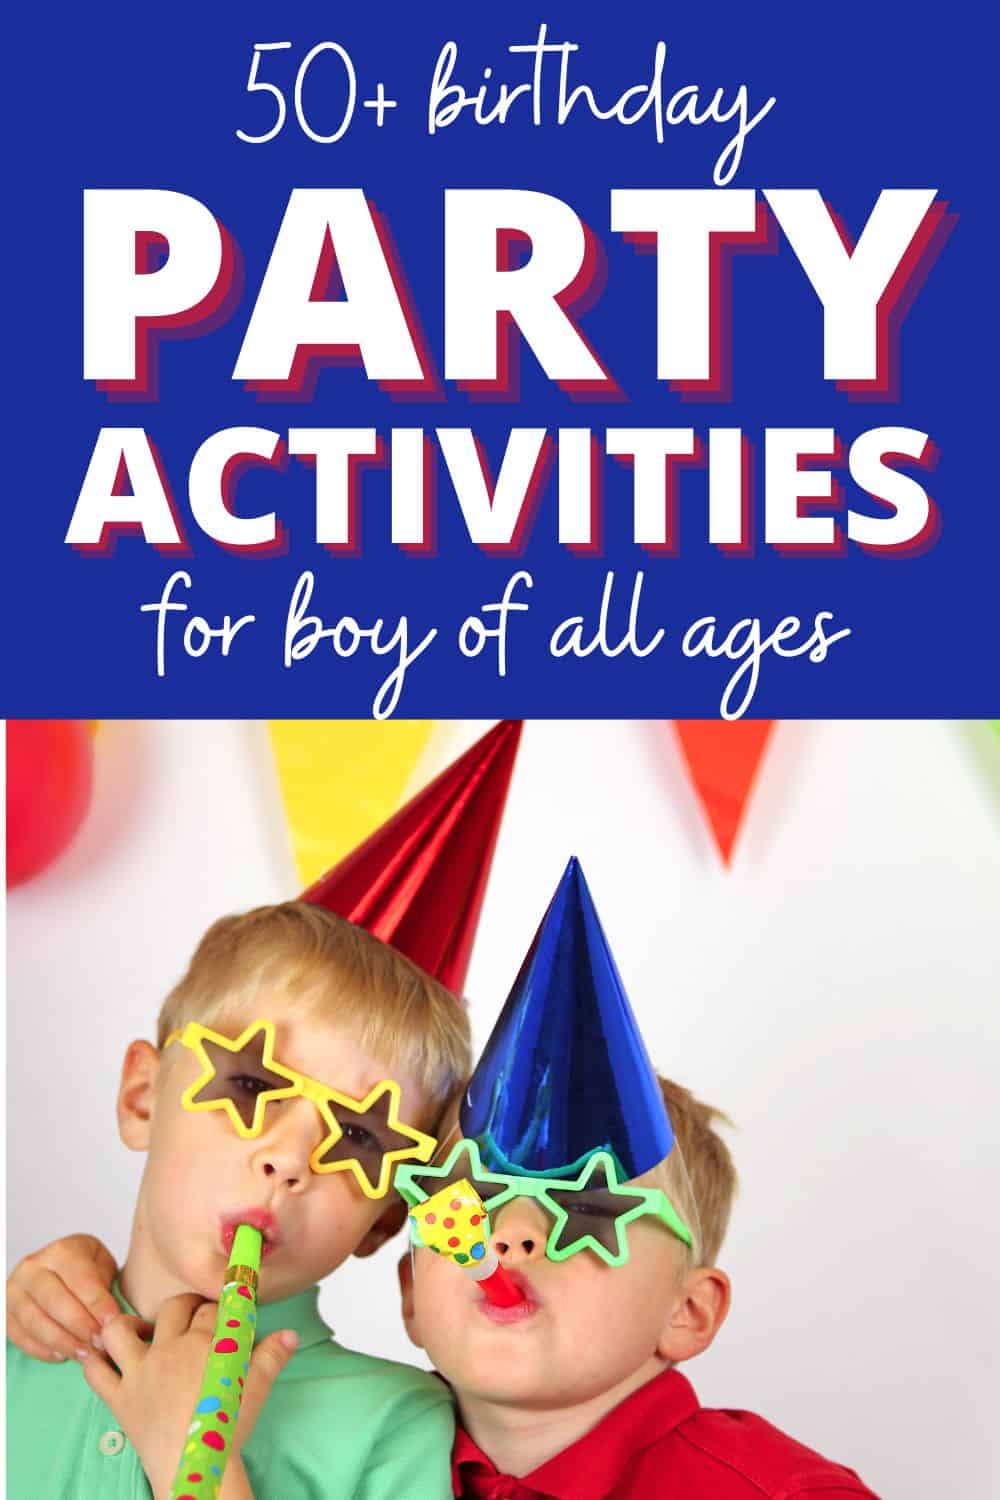 activities for boys birthday party feature image